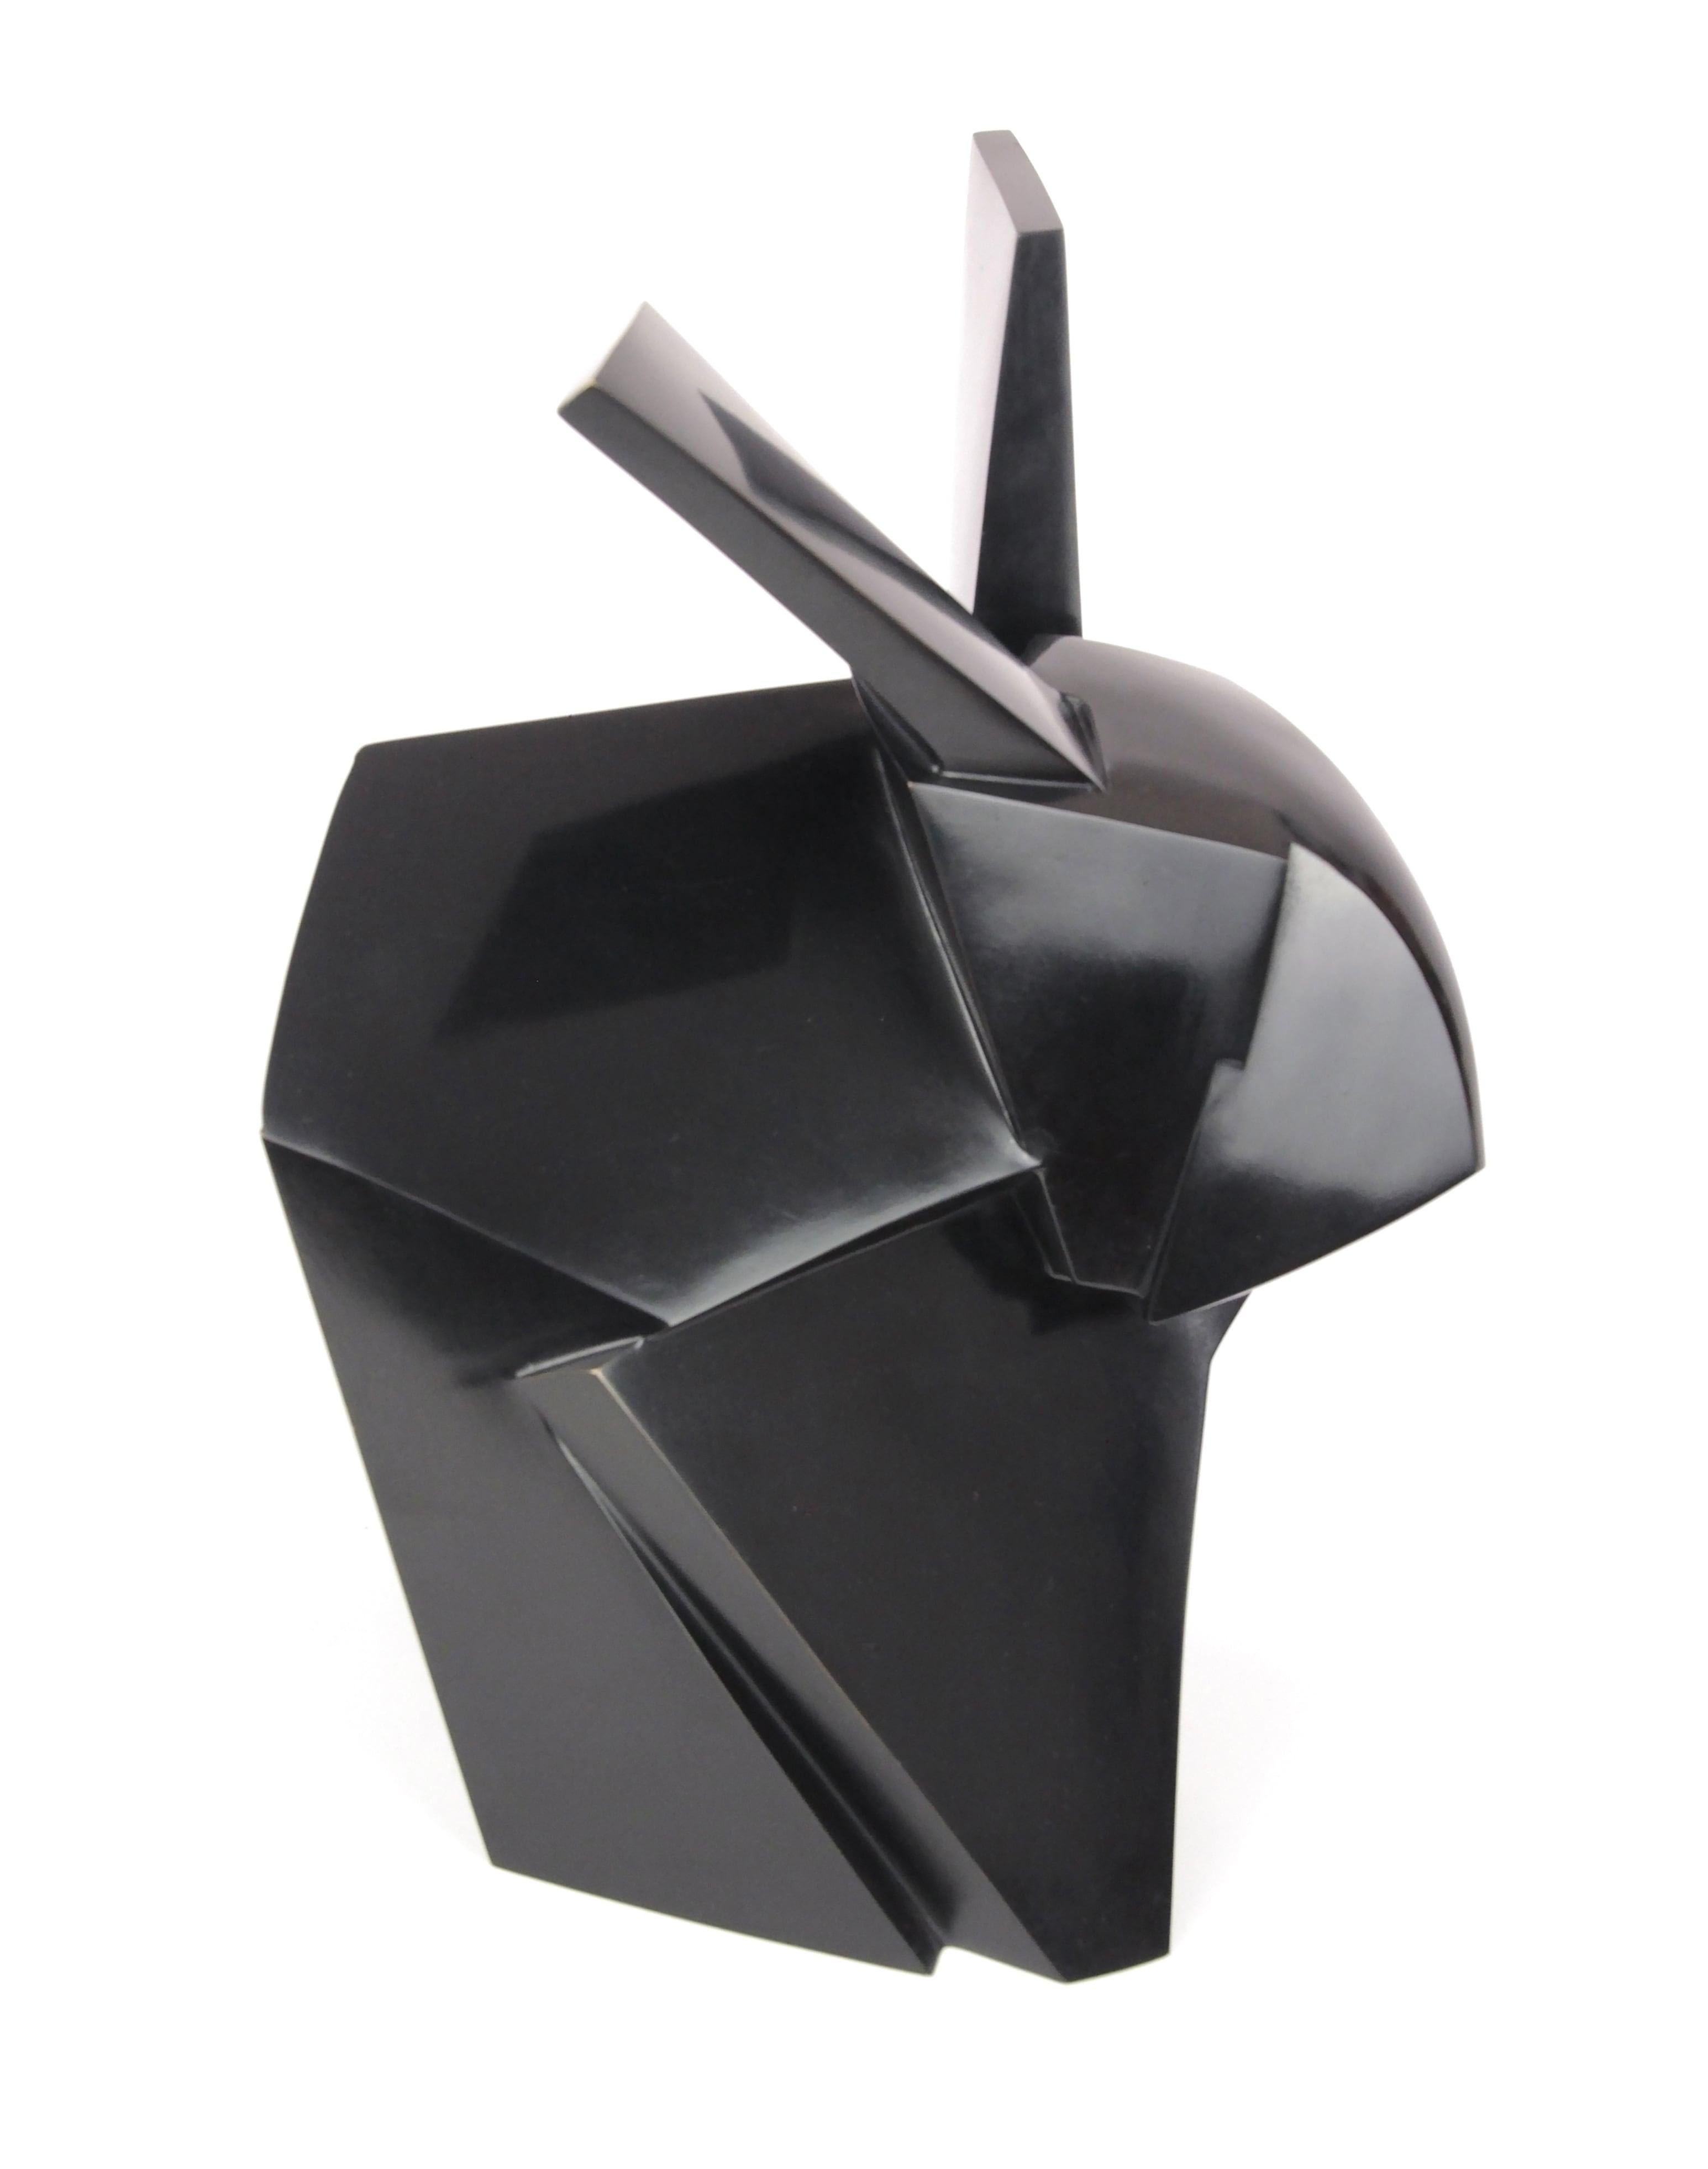 Jokio is a bronze sculpture by contemporary artist Jacques Owczarek, dimensions are 27 × 19 × 19 cm (10.6 × 7.5 × 7.5 in). The sculpture is signed and numbered, it is part of a limited edition of 8 editions + 4 artist’s proofs, and comes with a